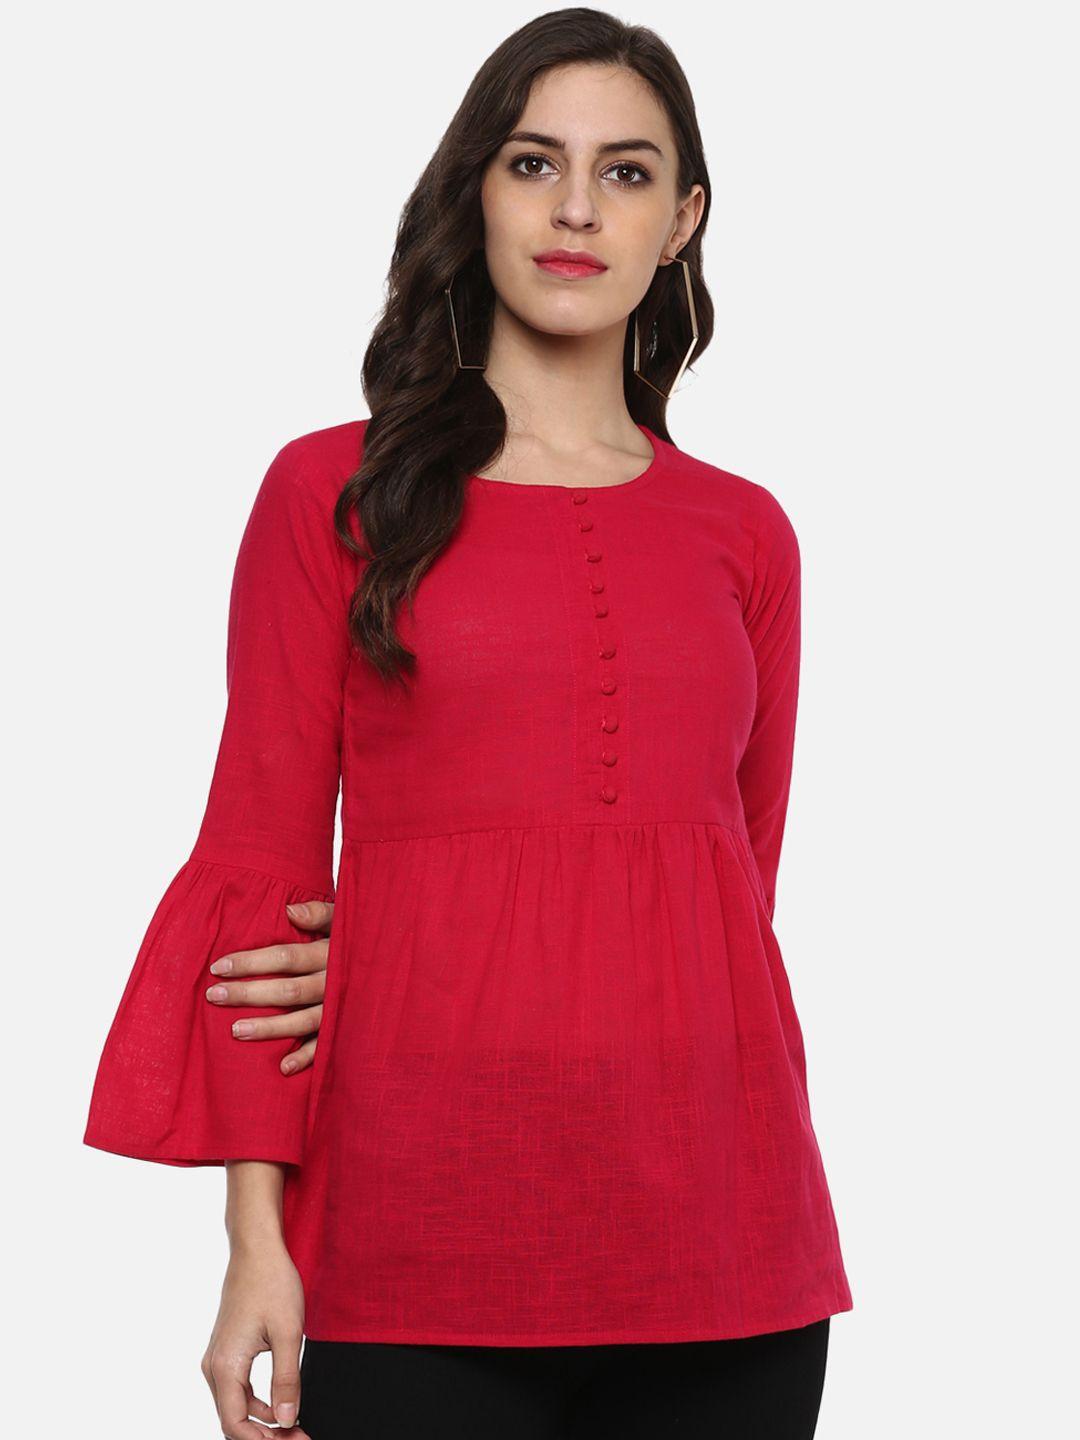 yash gallery women red solid empire top